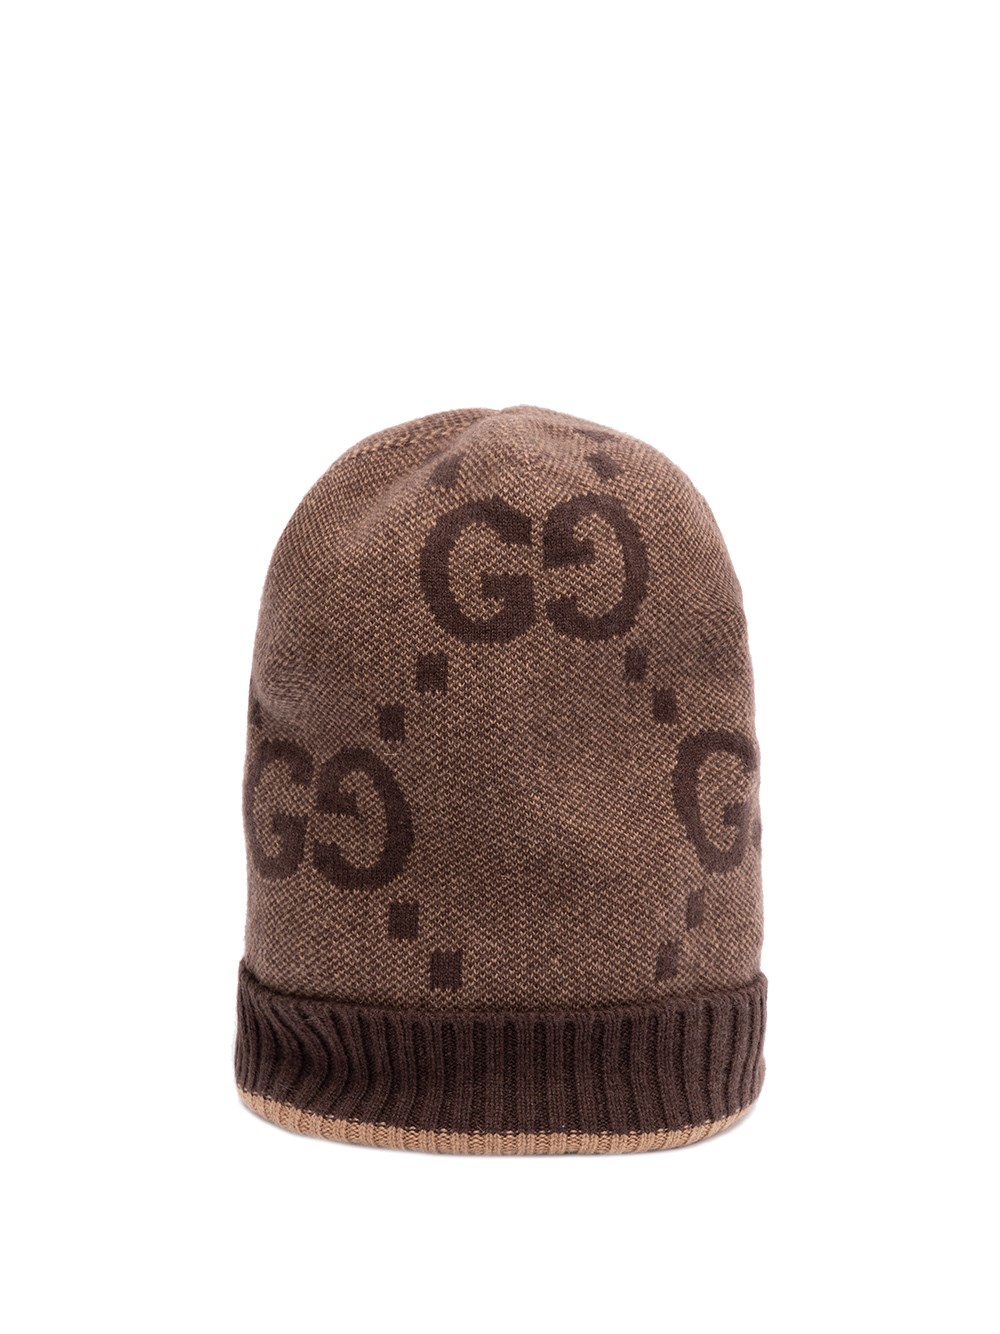 GUCCI `GG` KNIT CASHMERE HAT